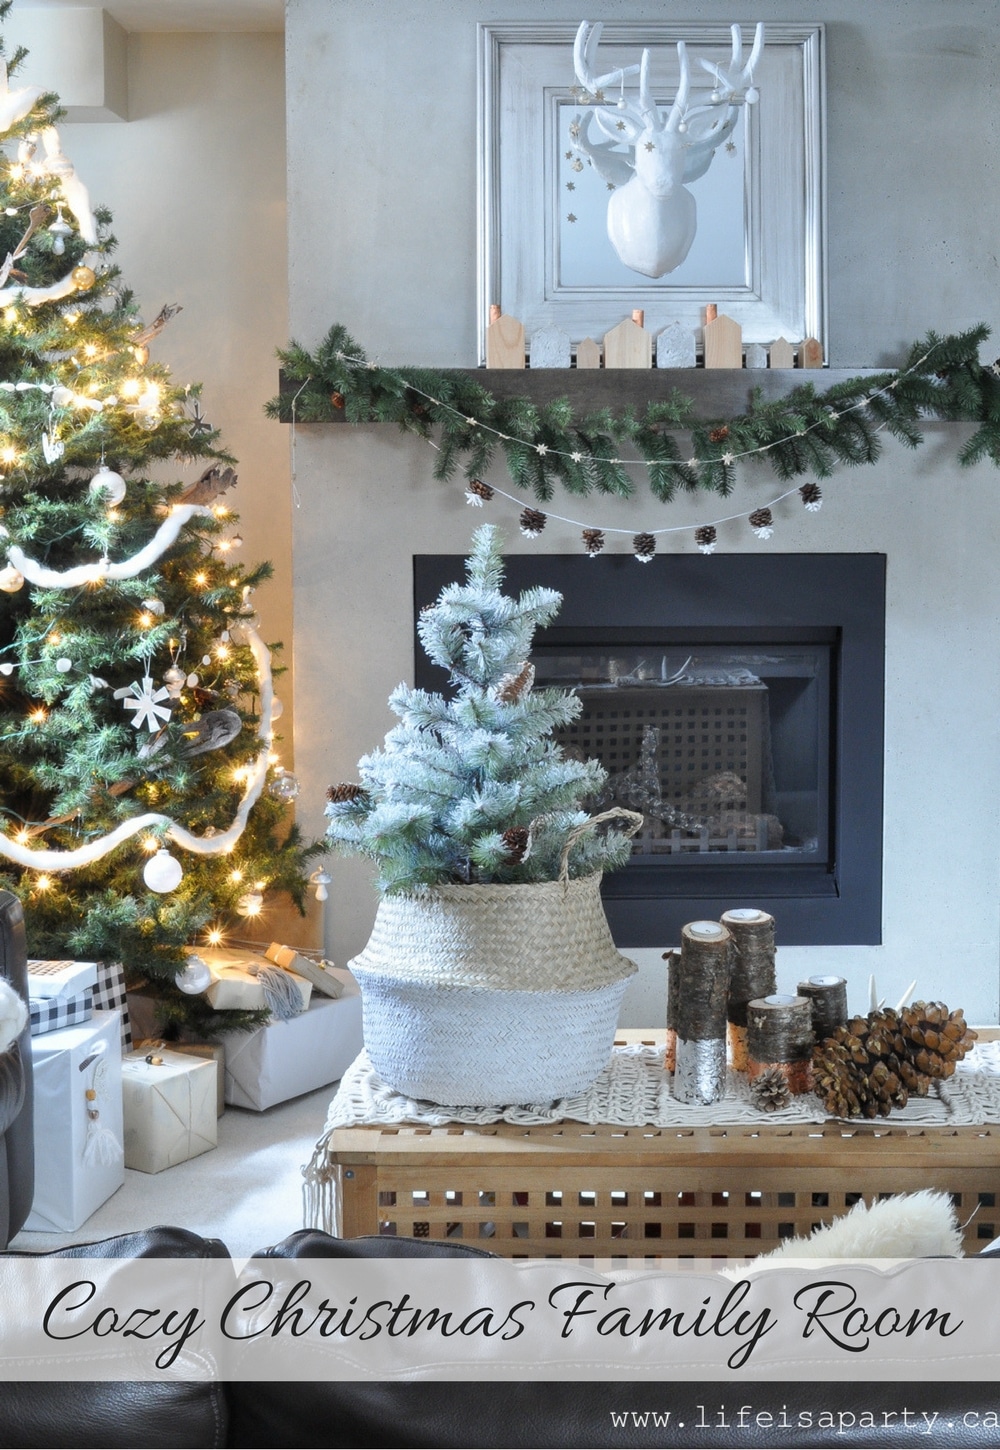 Cozy Christmas Family Room: All decorated with neutral Christmas decor using whites, creams, and lots of different textures for interest.